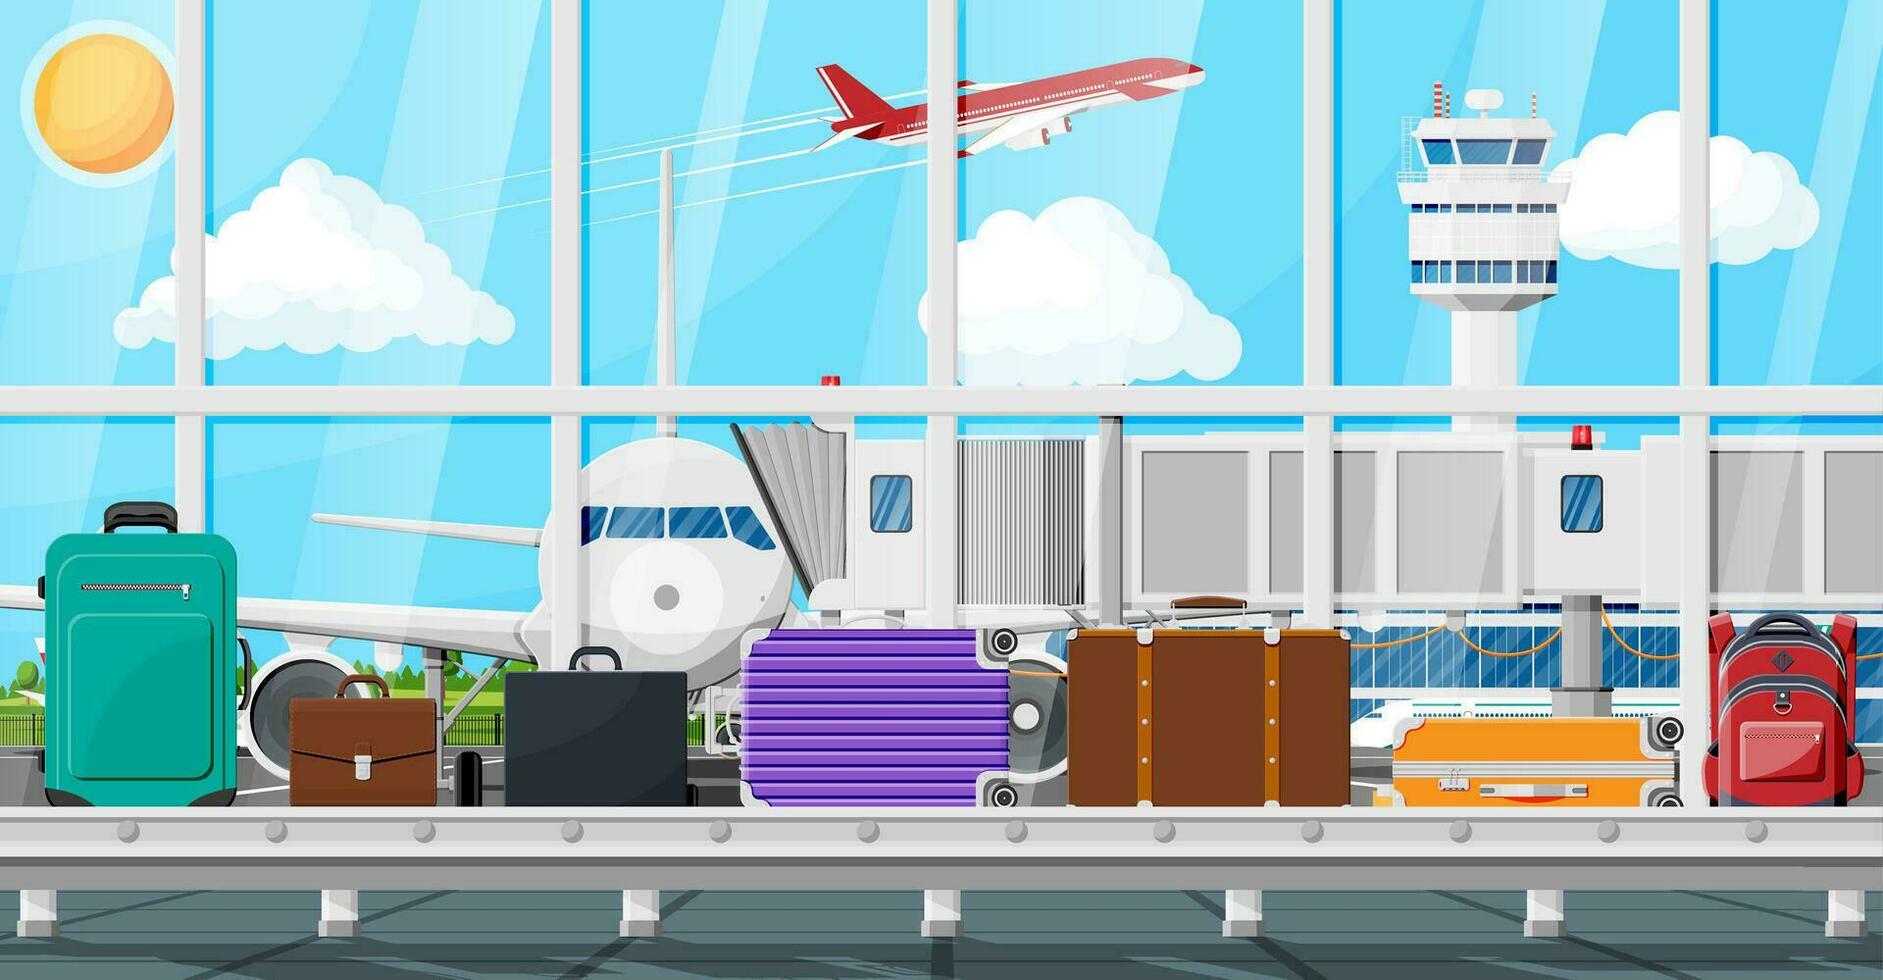 Luggage Carousel Against Airport Window With Taking Off Plane. Conveyor Belt With Passenger Luggage. Baggage Claim In Airport Interior. Logistic And Delivery. Cartoon Flat Vector Illustration